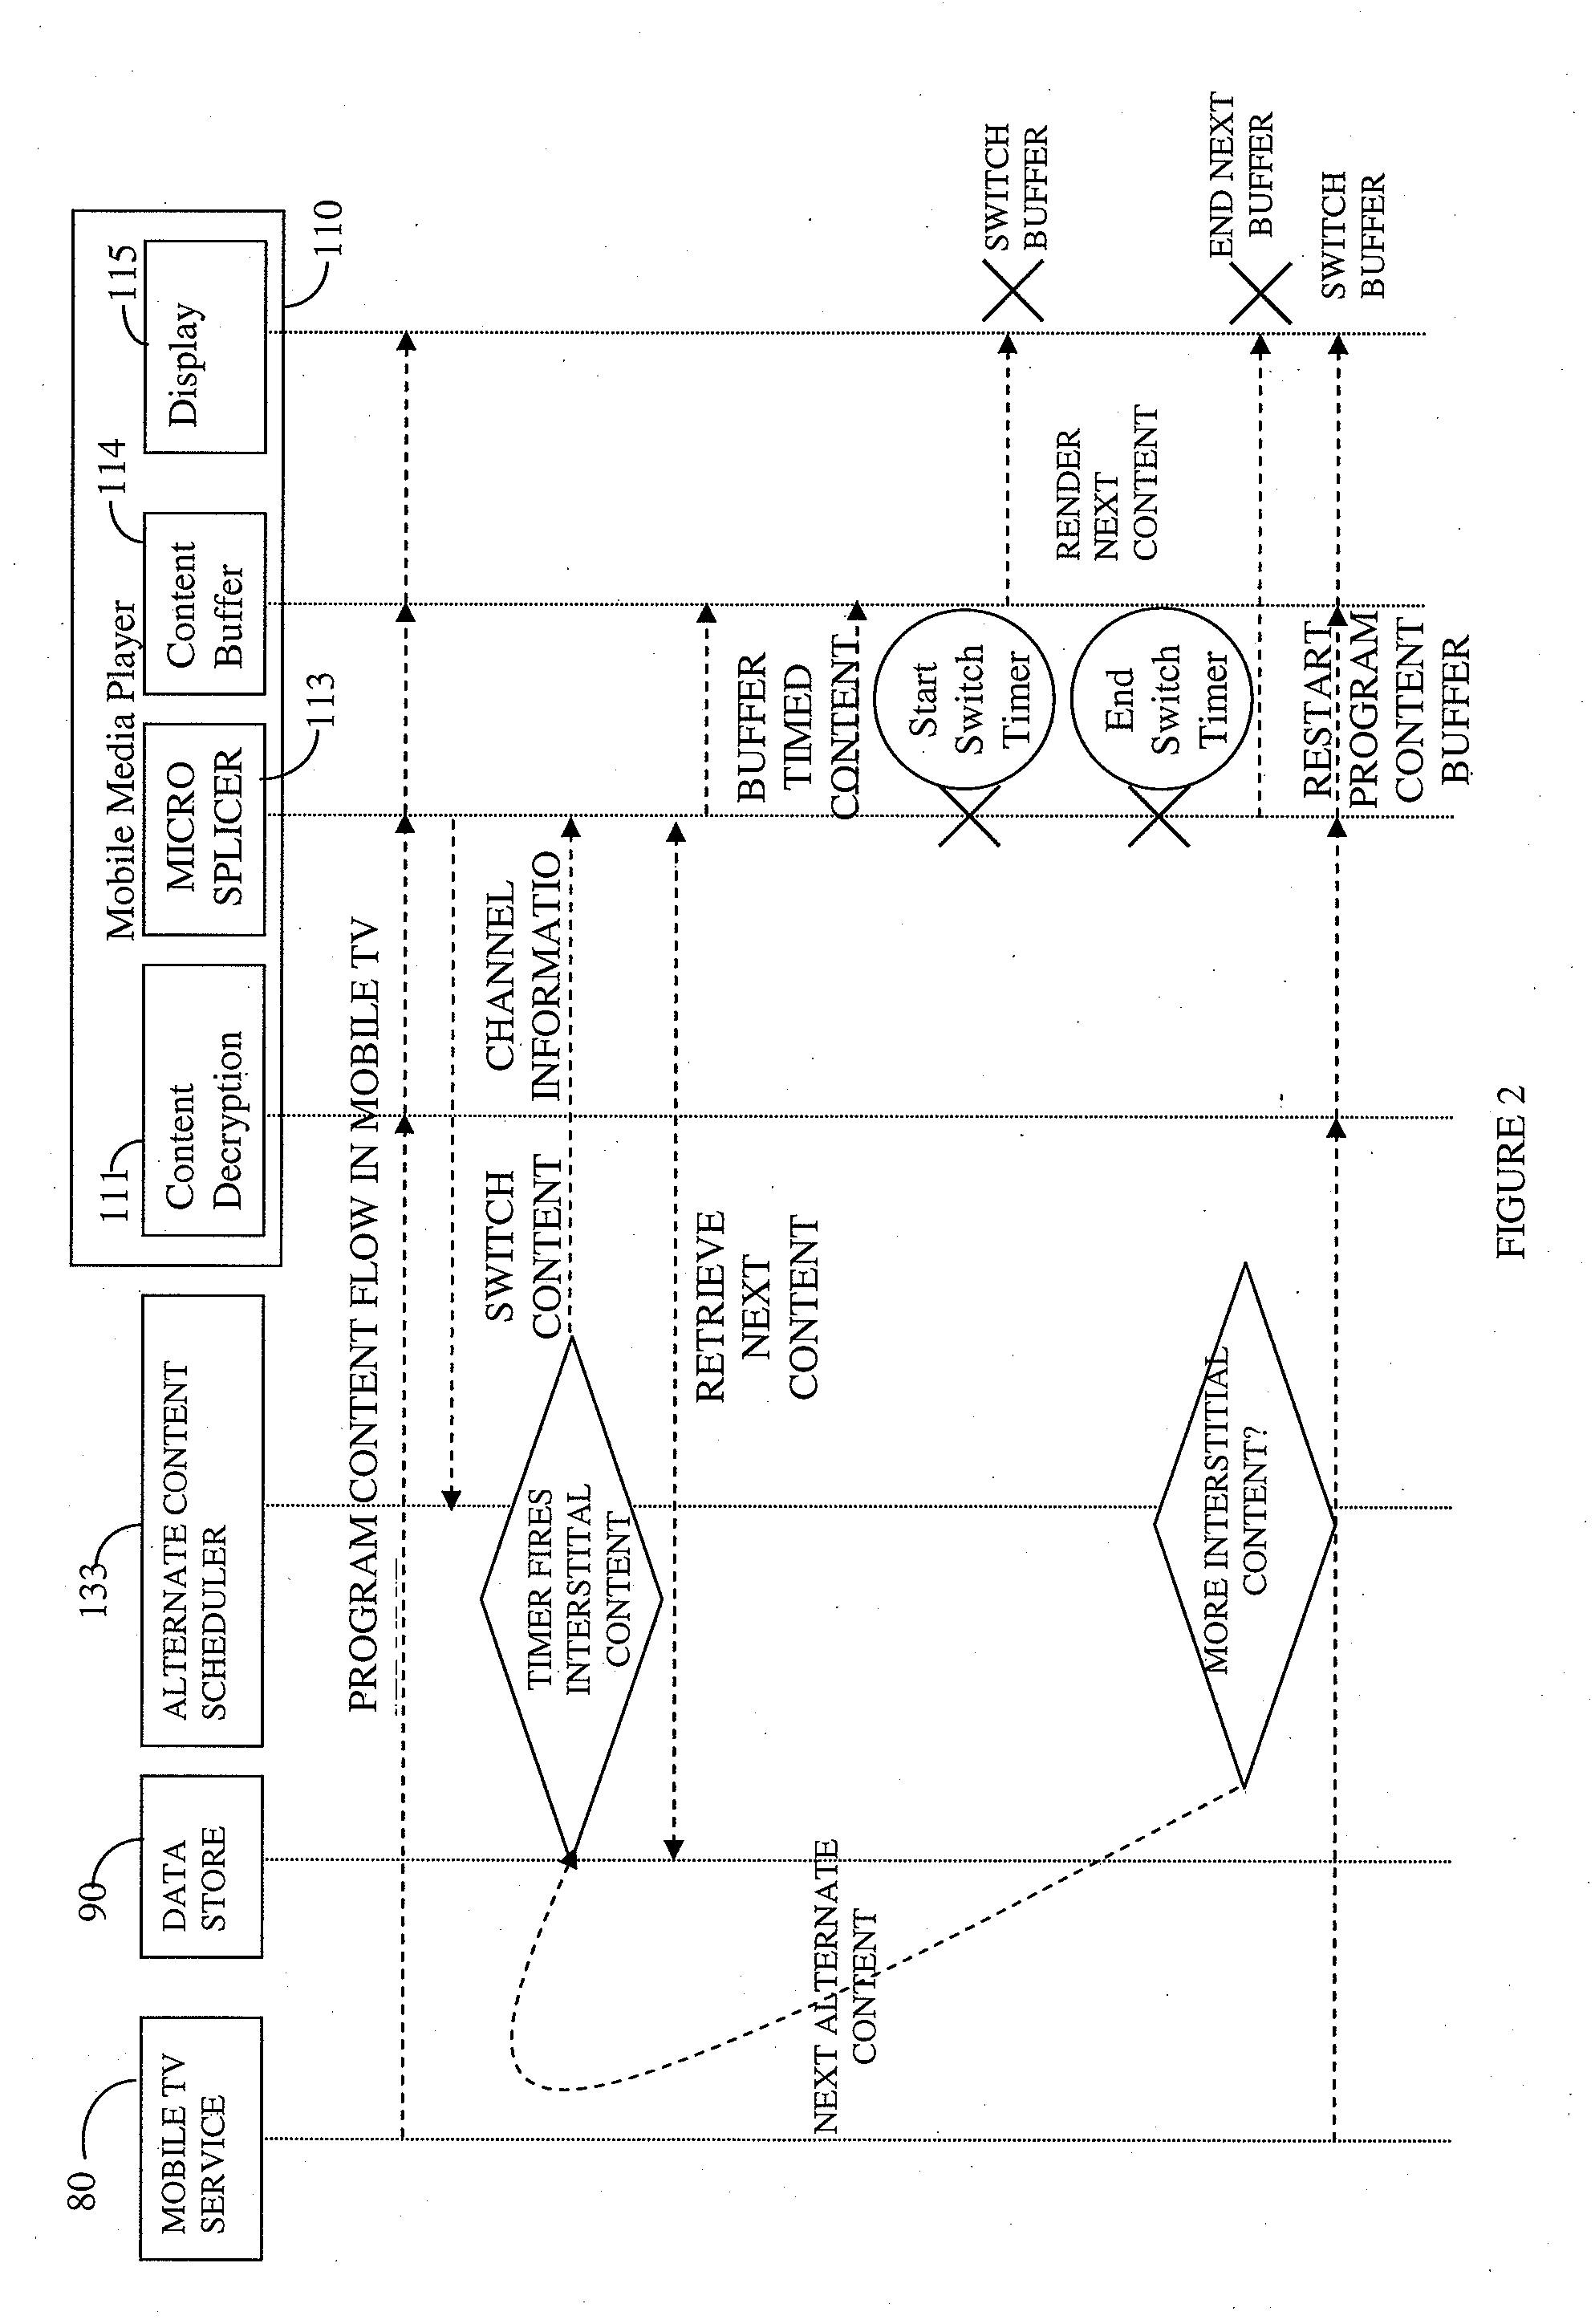 Micro-splicer for inserting alternate content to a content stream on a handheld device